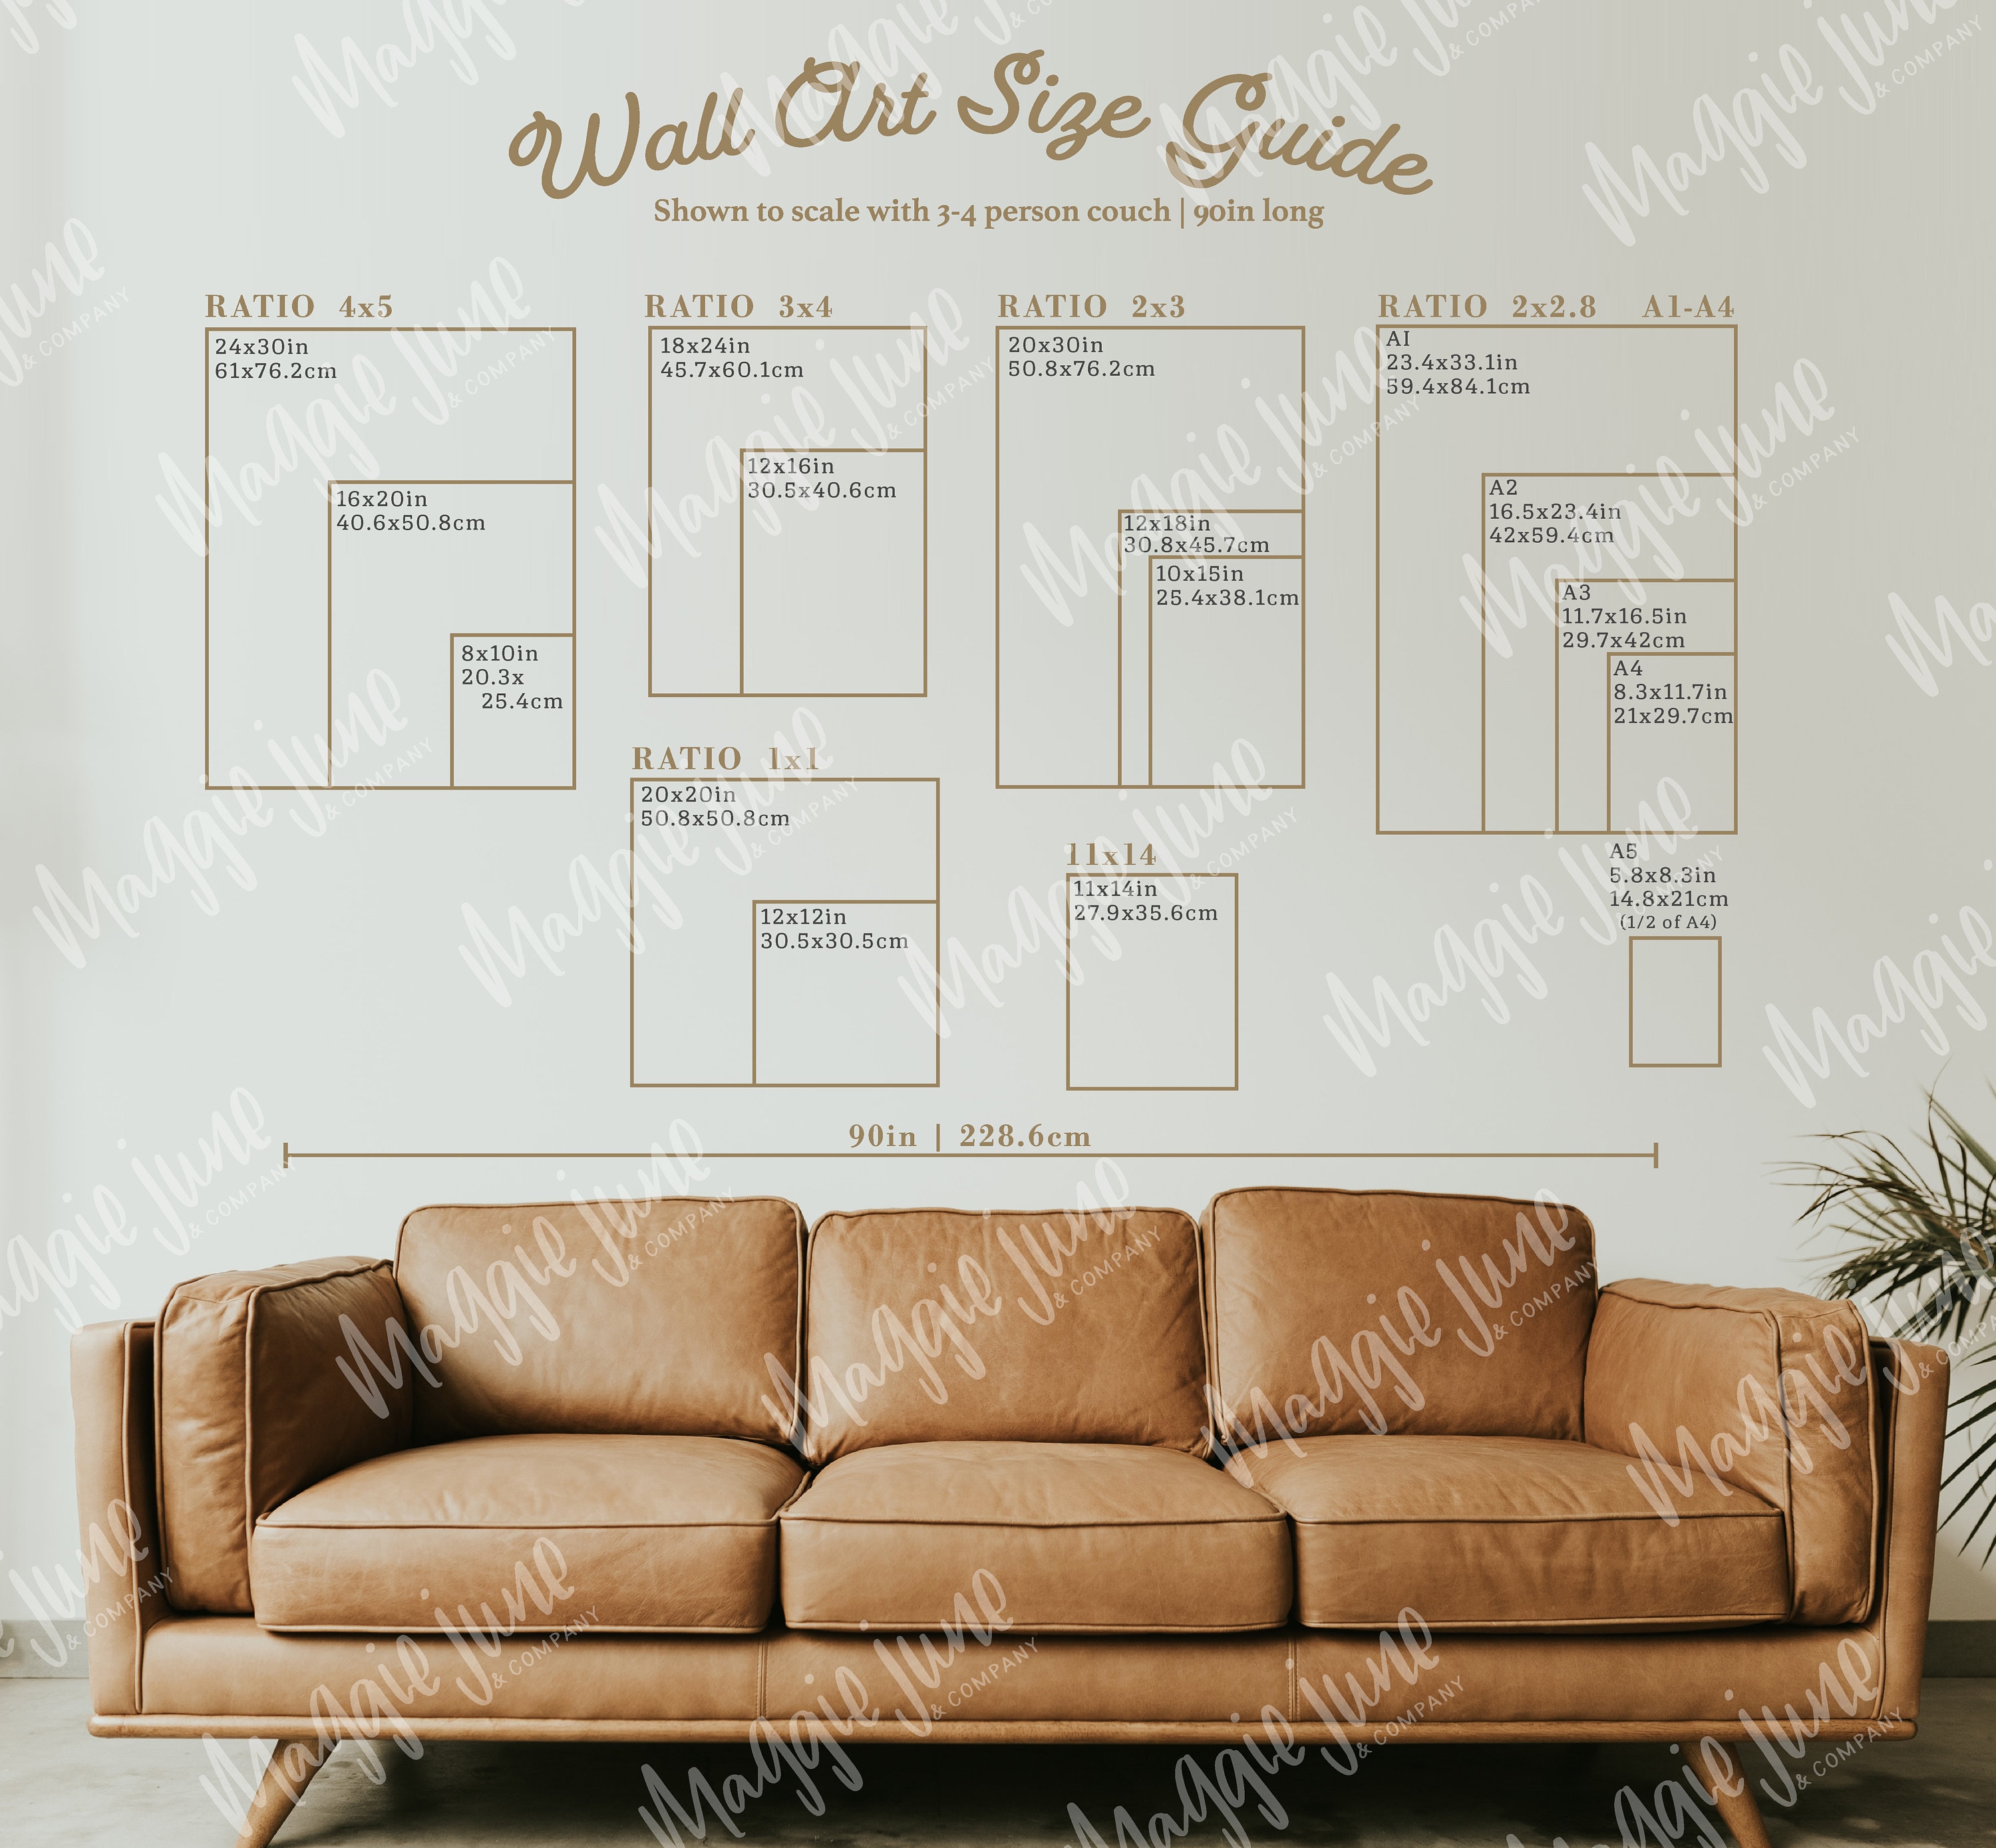 Wall Art Size Guide Printable Image Size Guide for Print - Etsy UK